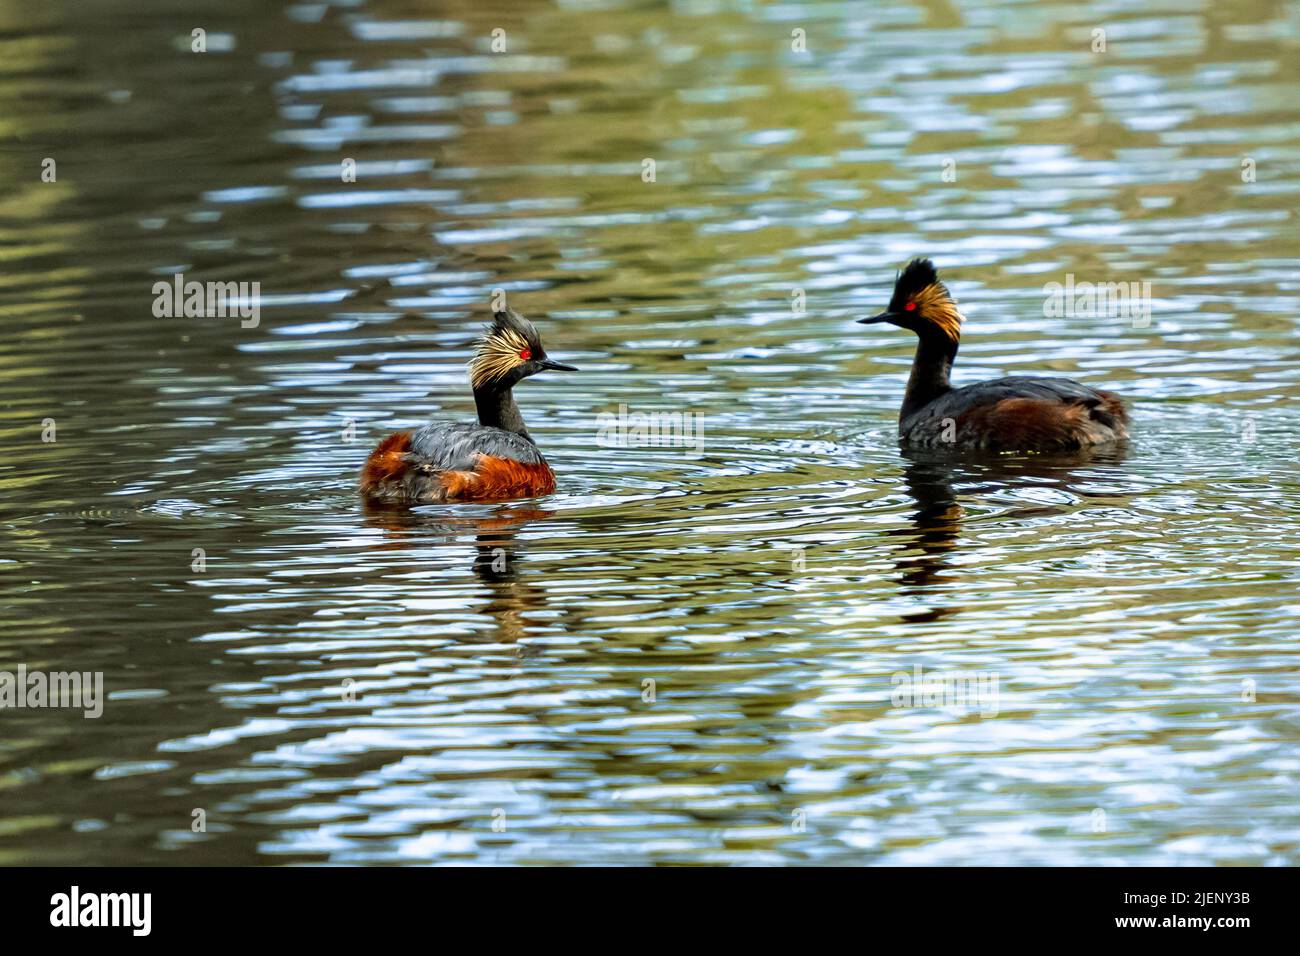 The sunlight brings out the bright coloring of an Eared Grebe in breeding plumage as a pair of them swim in a partly shaded lake. Stock Photo